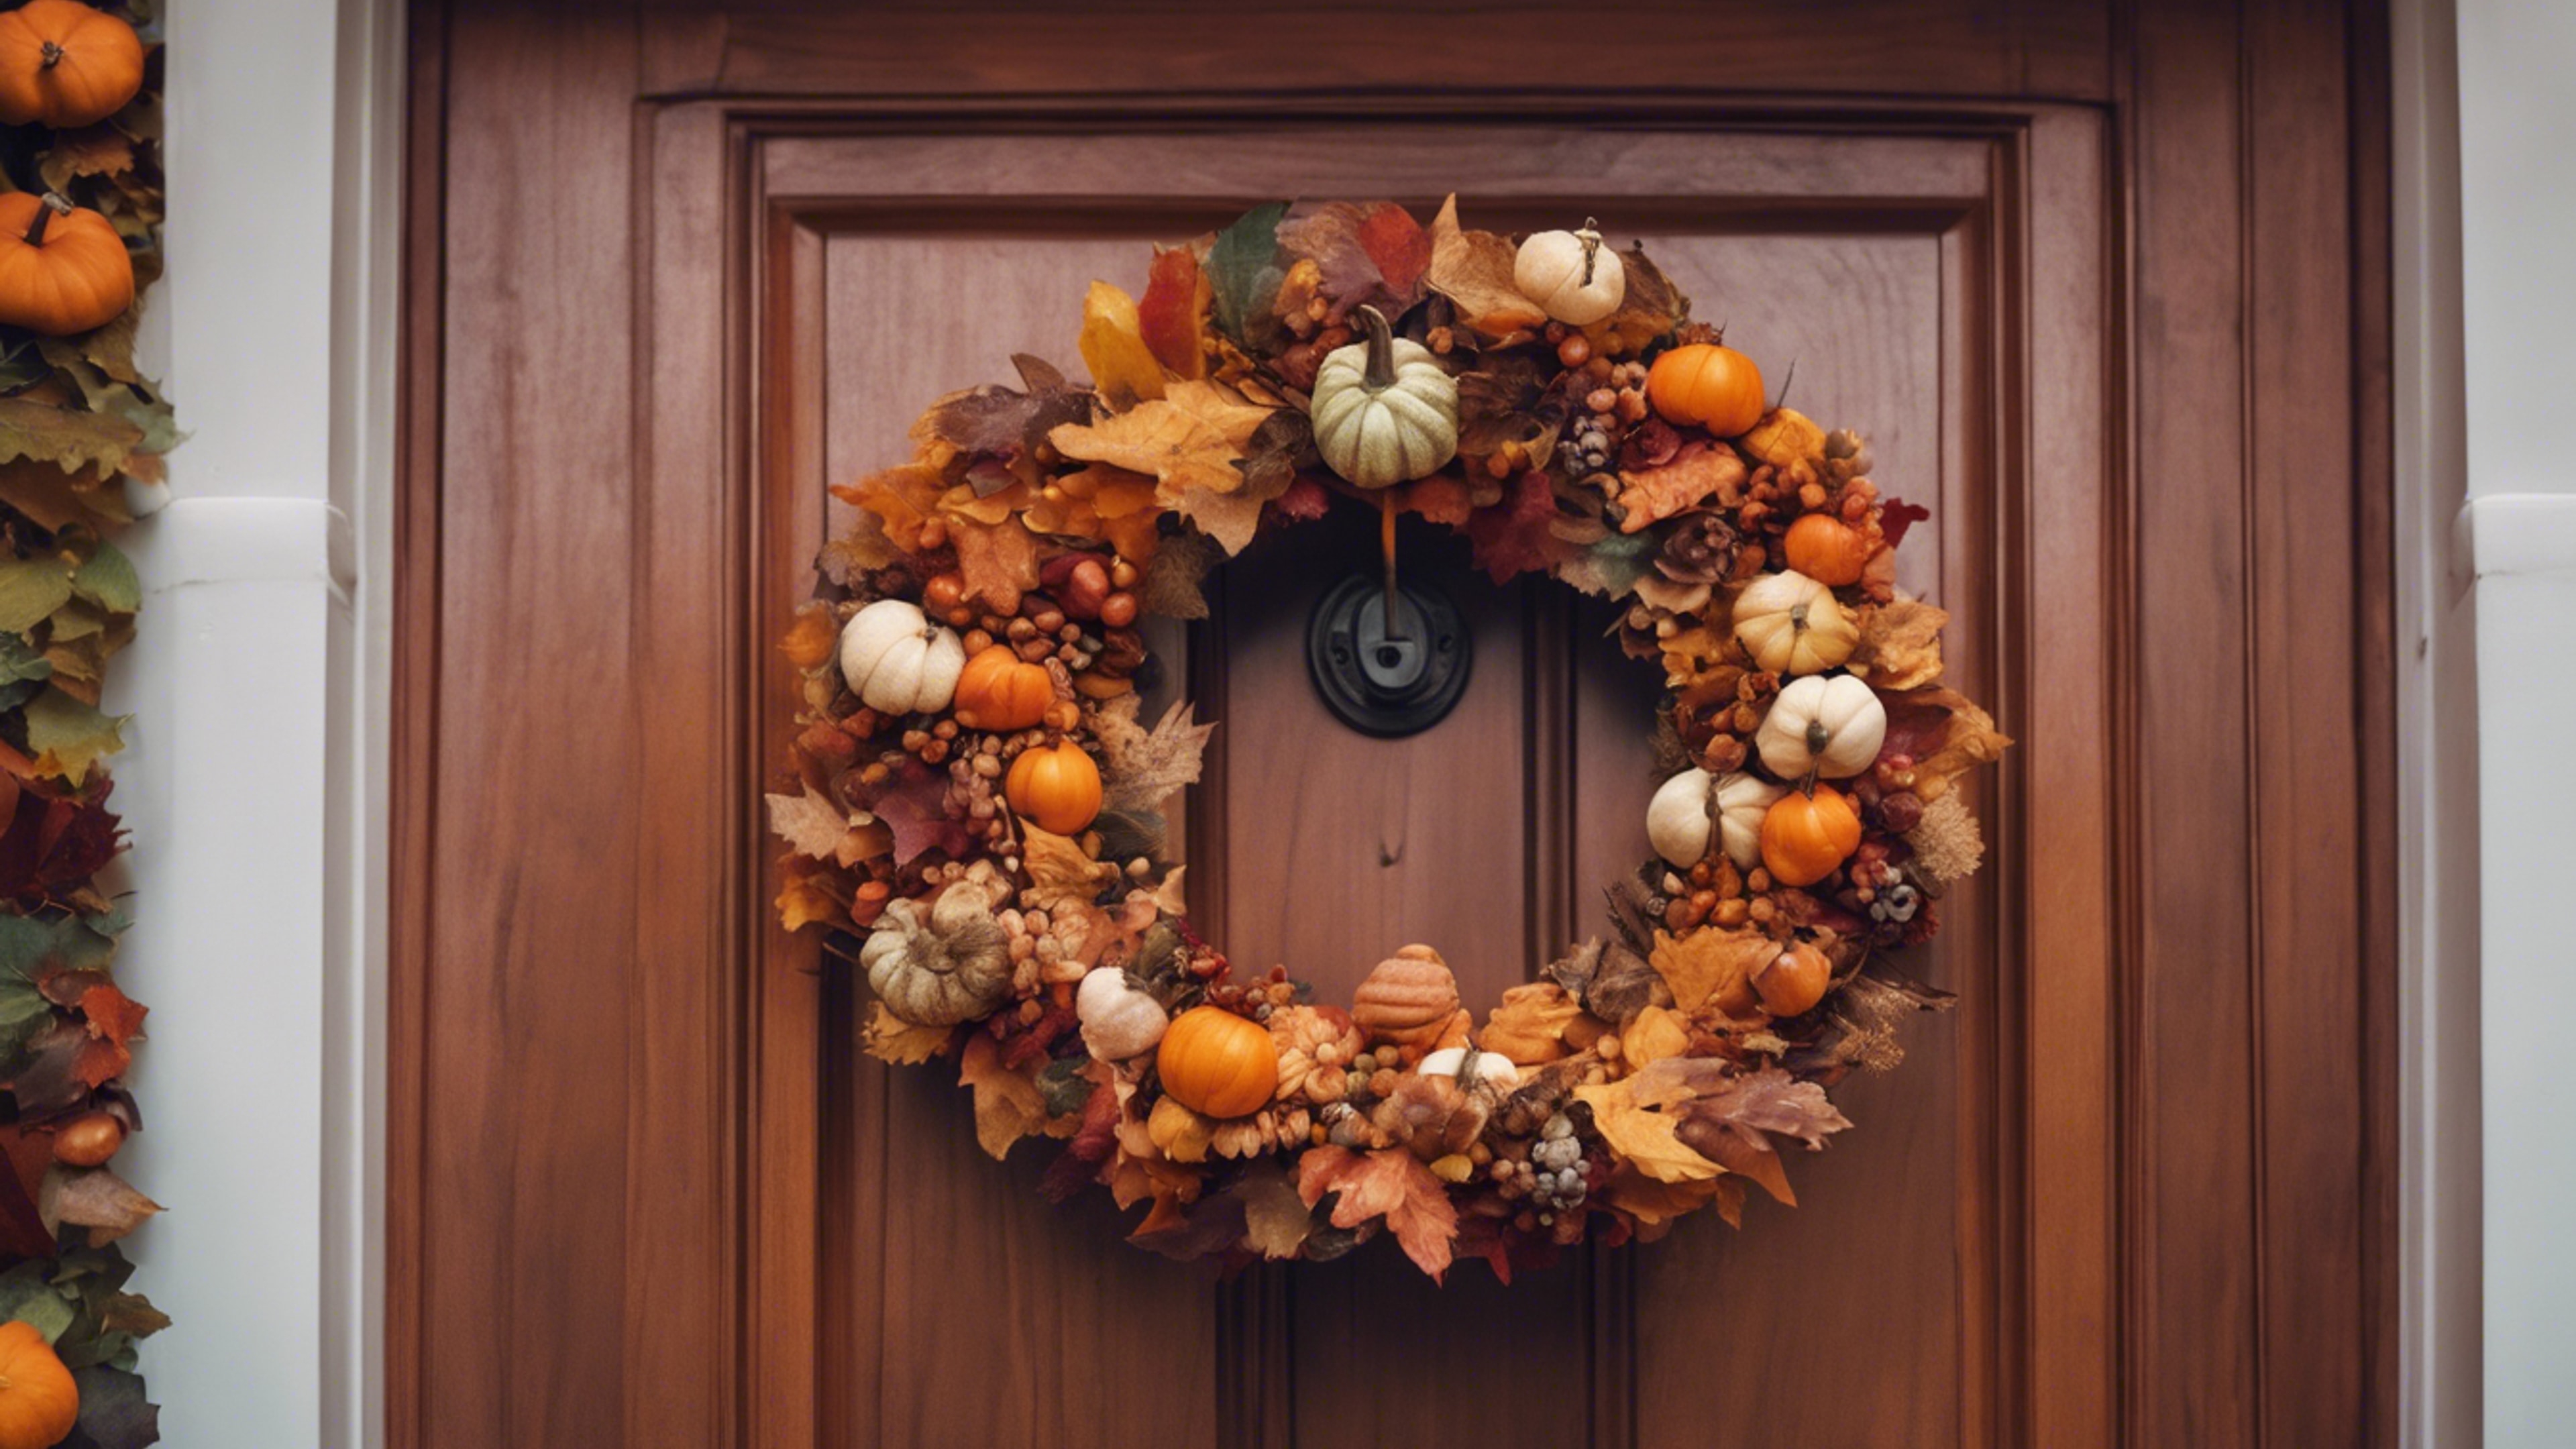 A festive autumn wreath made of colorful fall leaves and miniature pumpkins hanging elegantly on a mahogany door, signaling the start of the Thanksgiving holiday. טפט[f1a39b05ecd5476686a3]